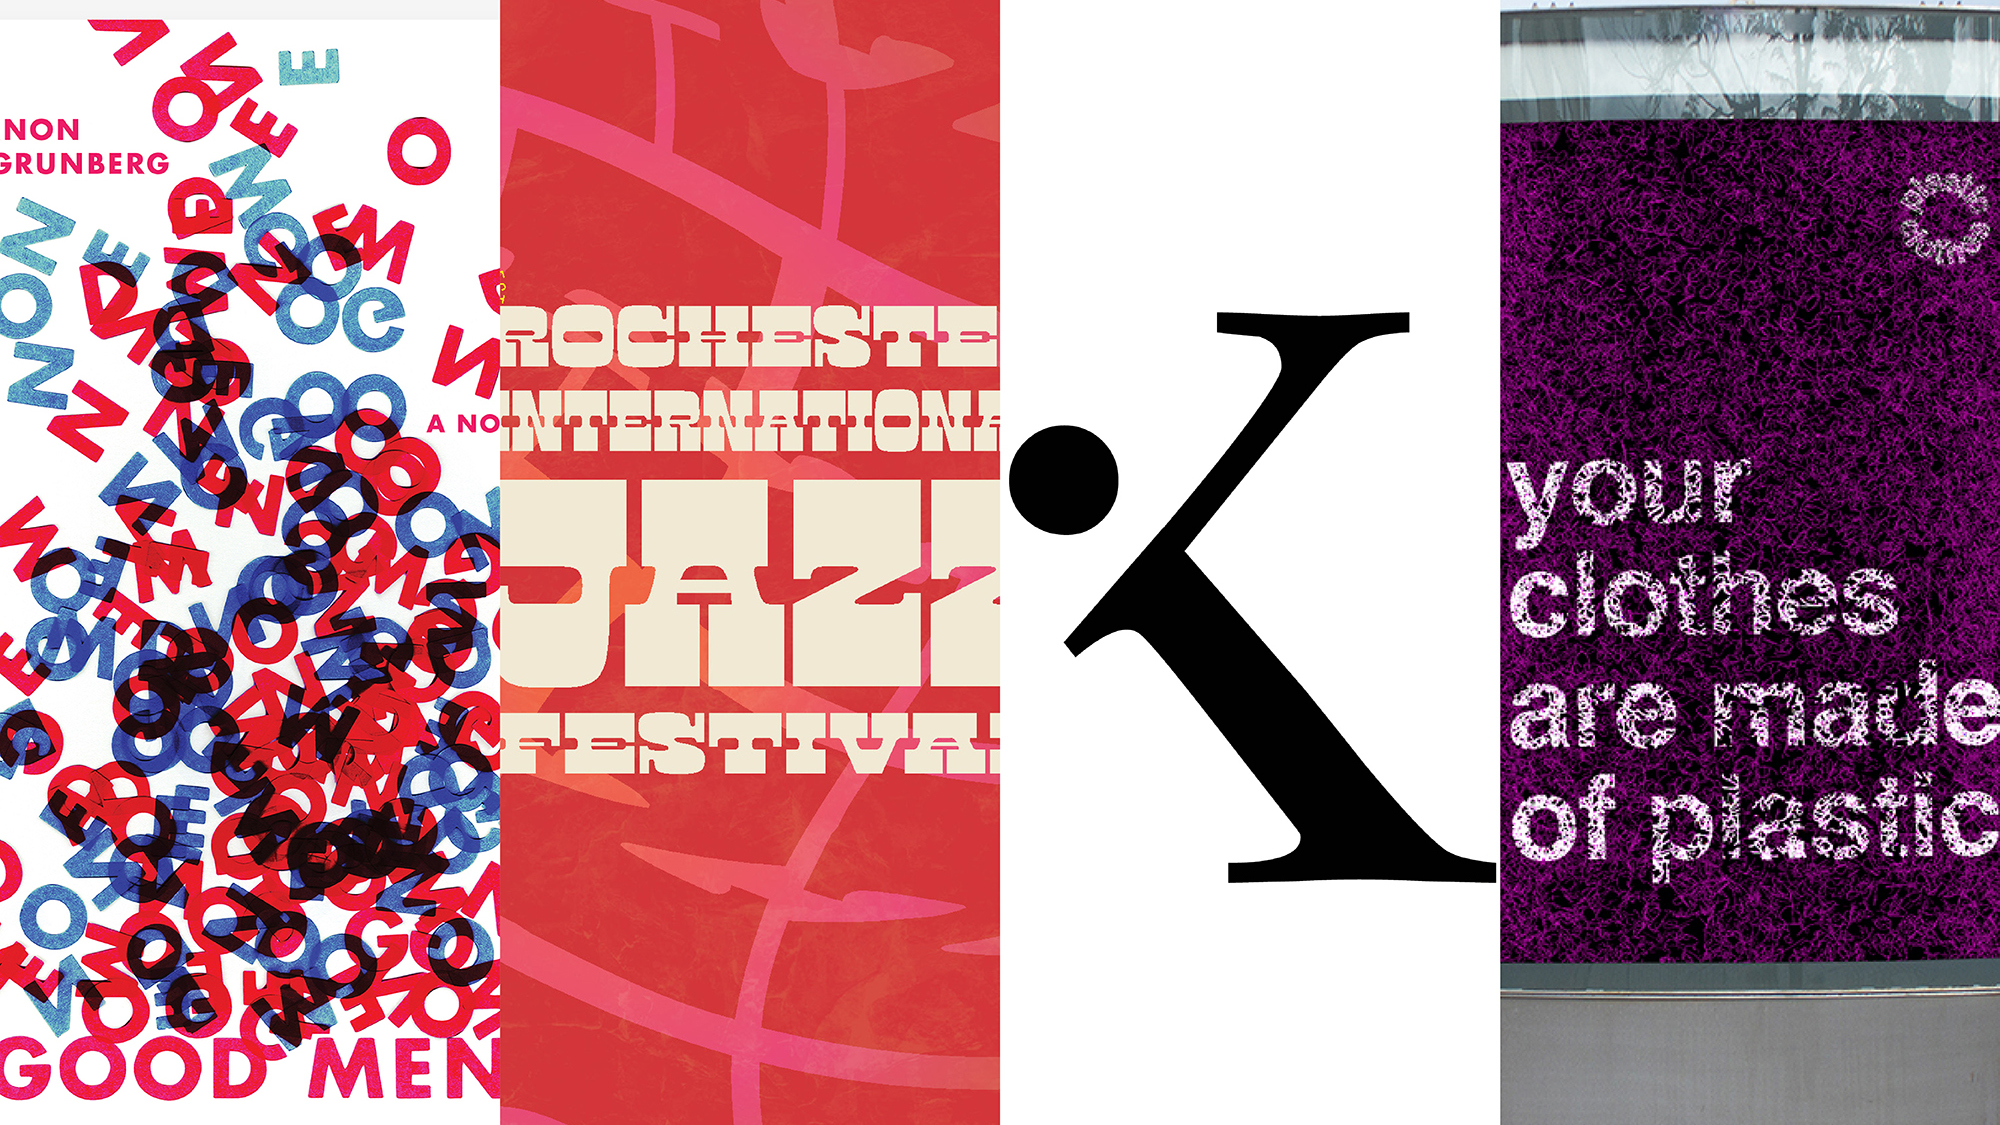 Side-by-side samples of typographic work by RIT students and faculty.